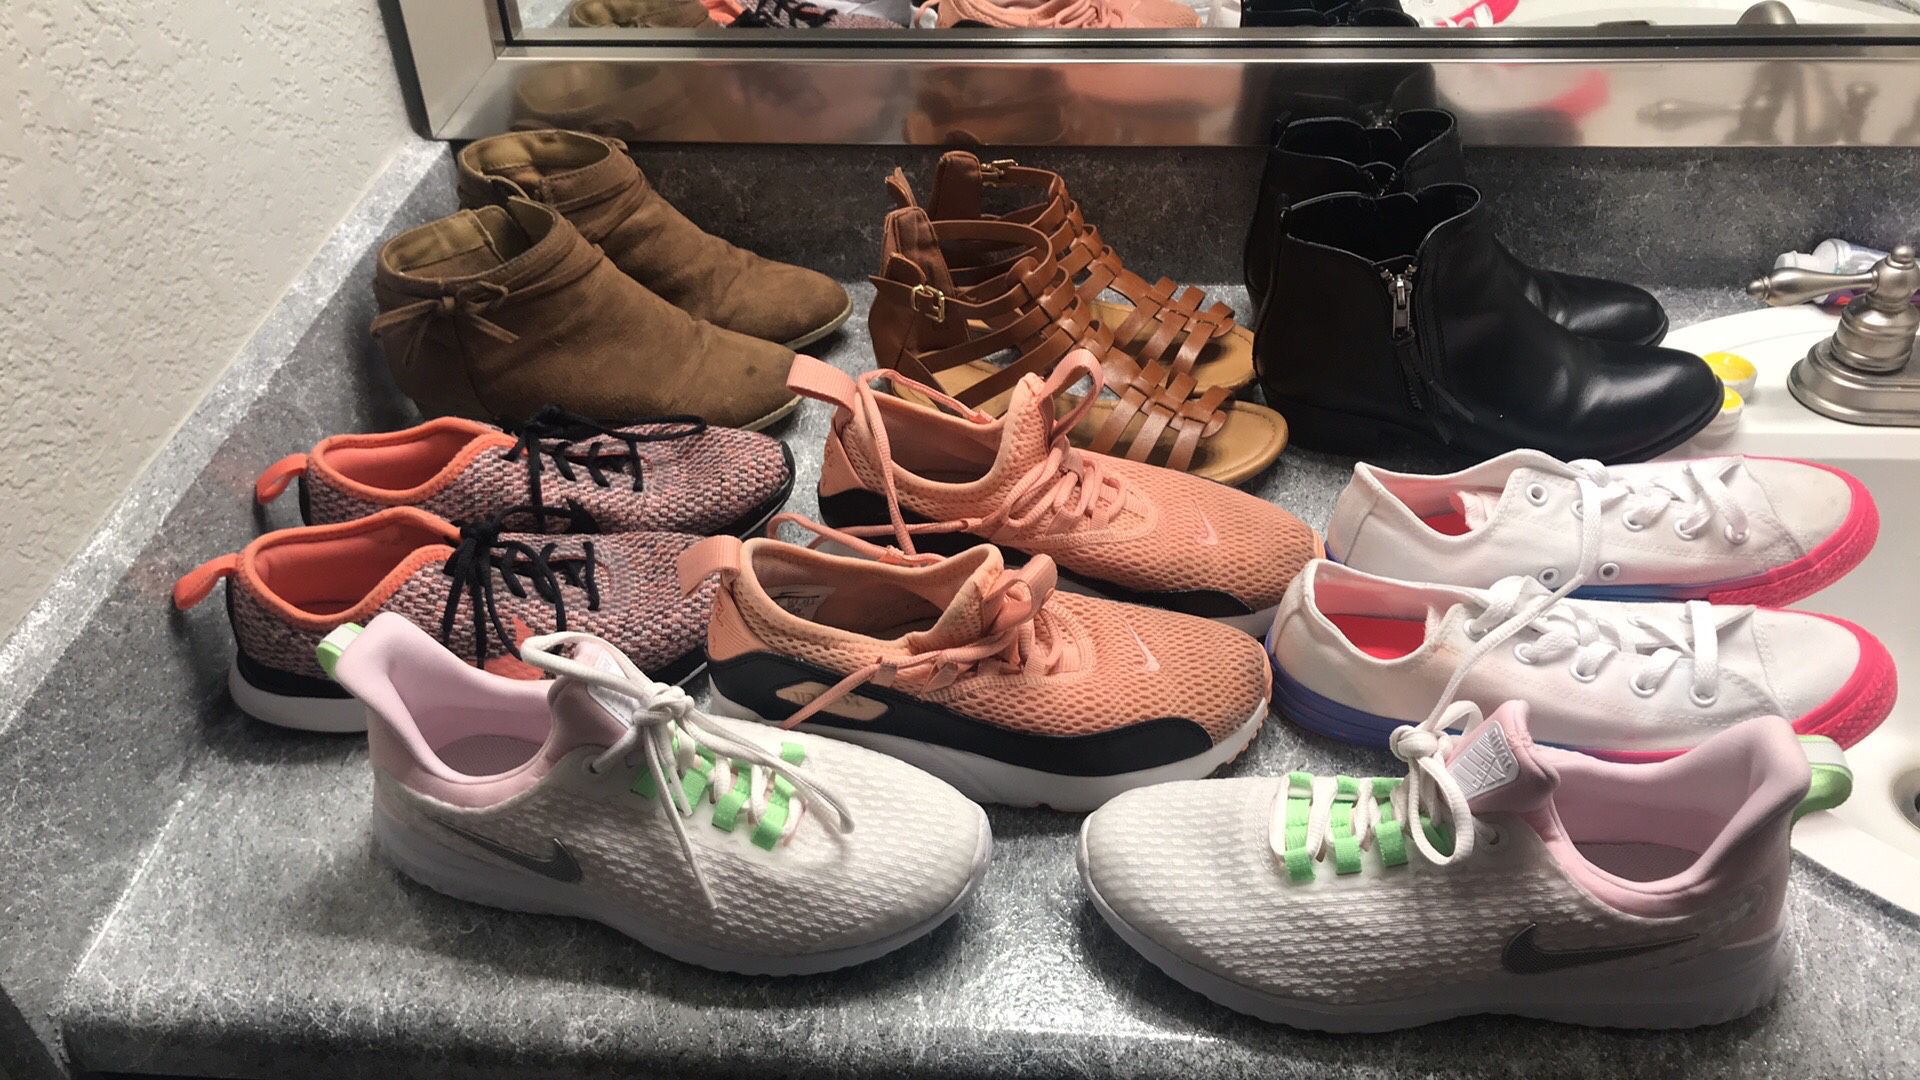 Kids clothes and shoes